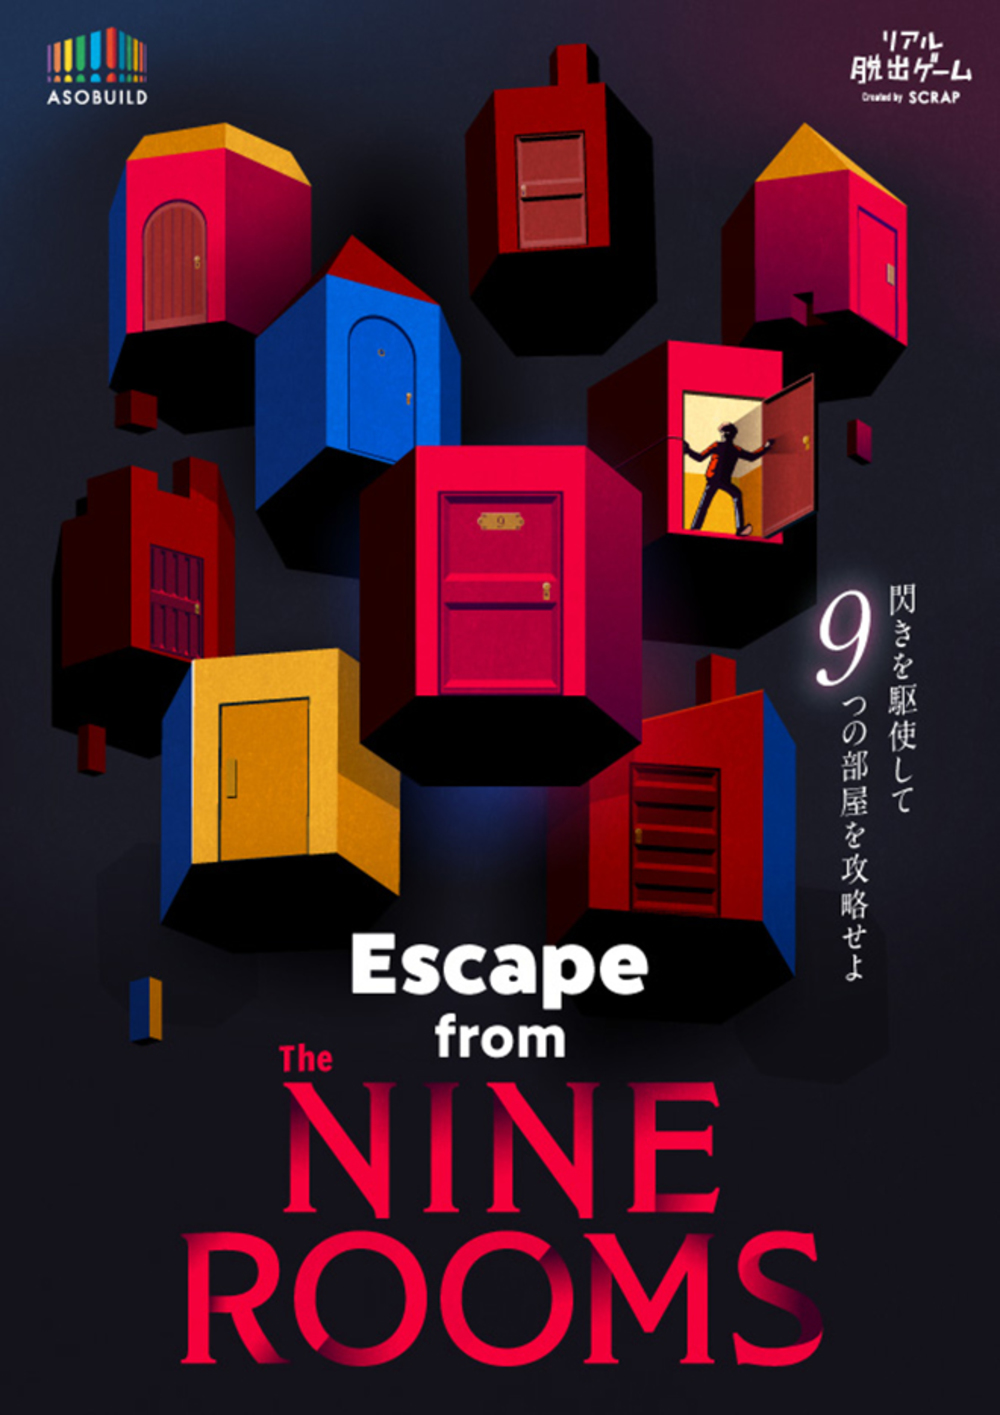 【SCRAP】Escape from The NINE ROOMS